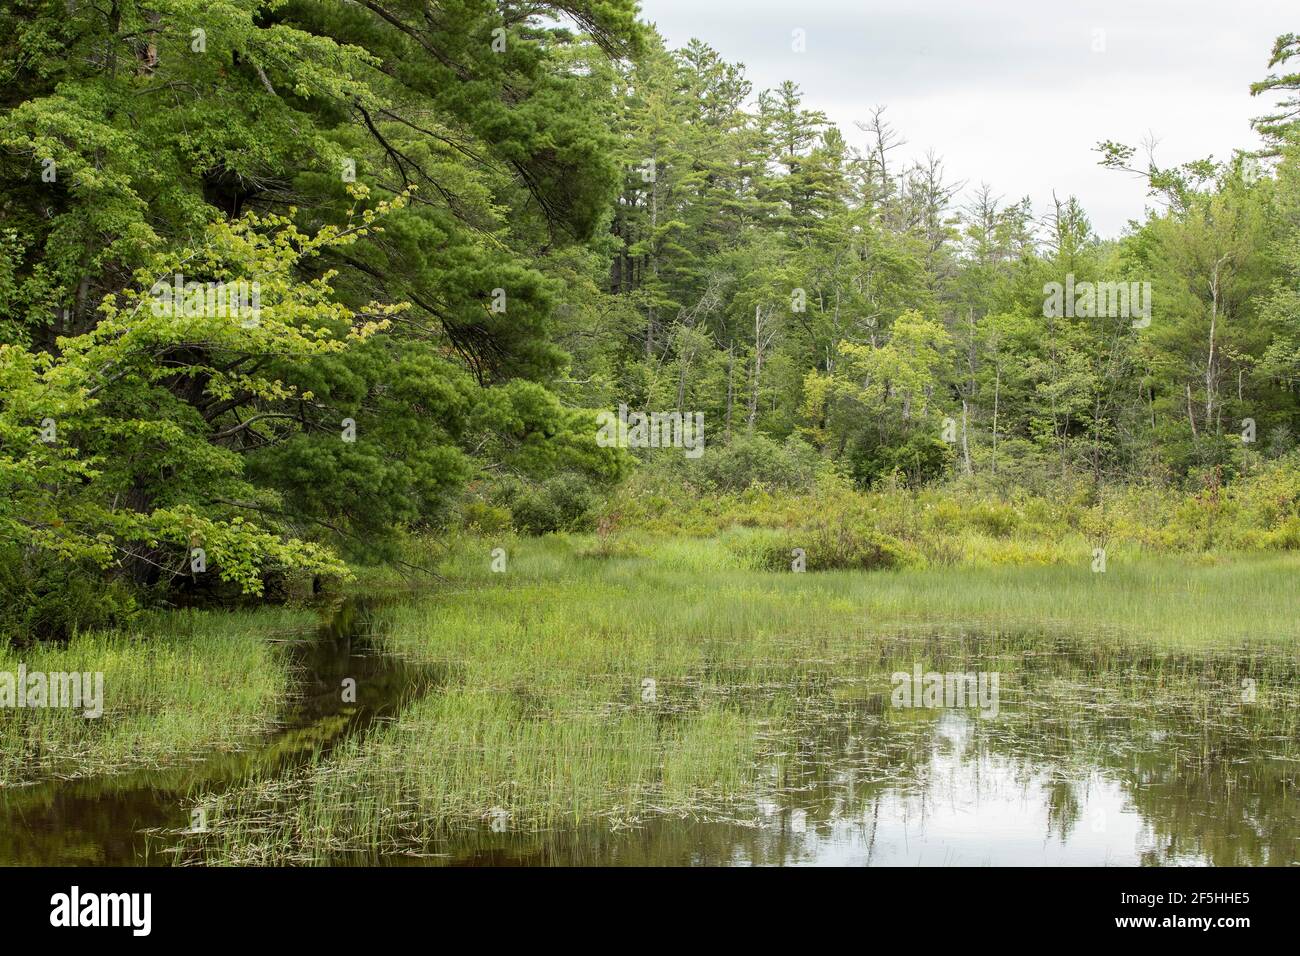 Childs Bog is one of many wetlands in Southwestern New Hampshire, located in Cheshire County. Harrisville is a quiet pretty little village. It's rural Stock Photo